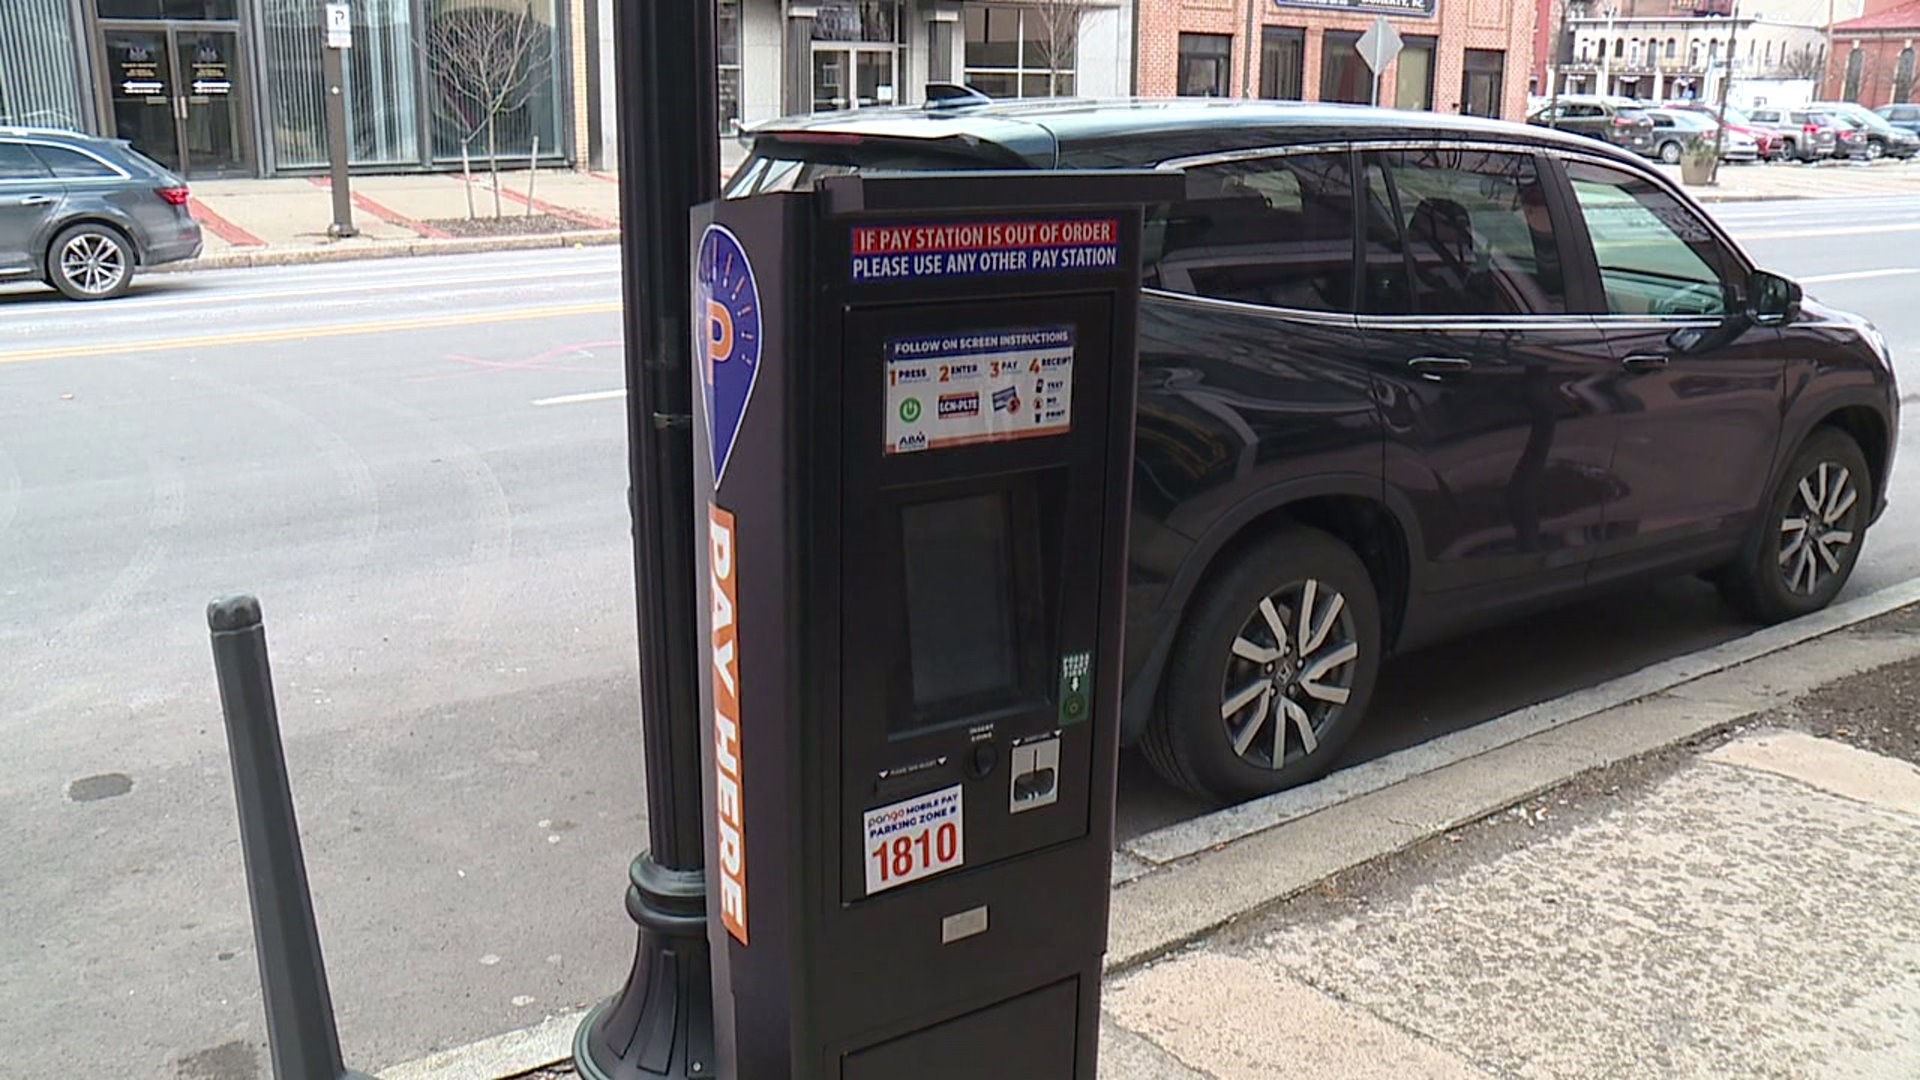 Some businesses in the city are trying to ease parking pains in the hopes that they will continue attracting shoppers to the downtown.